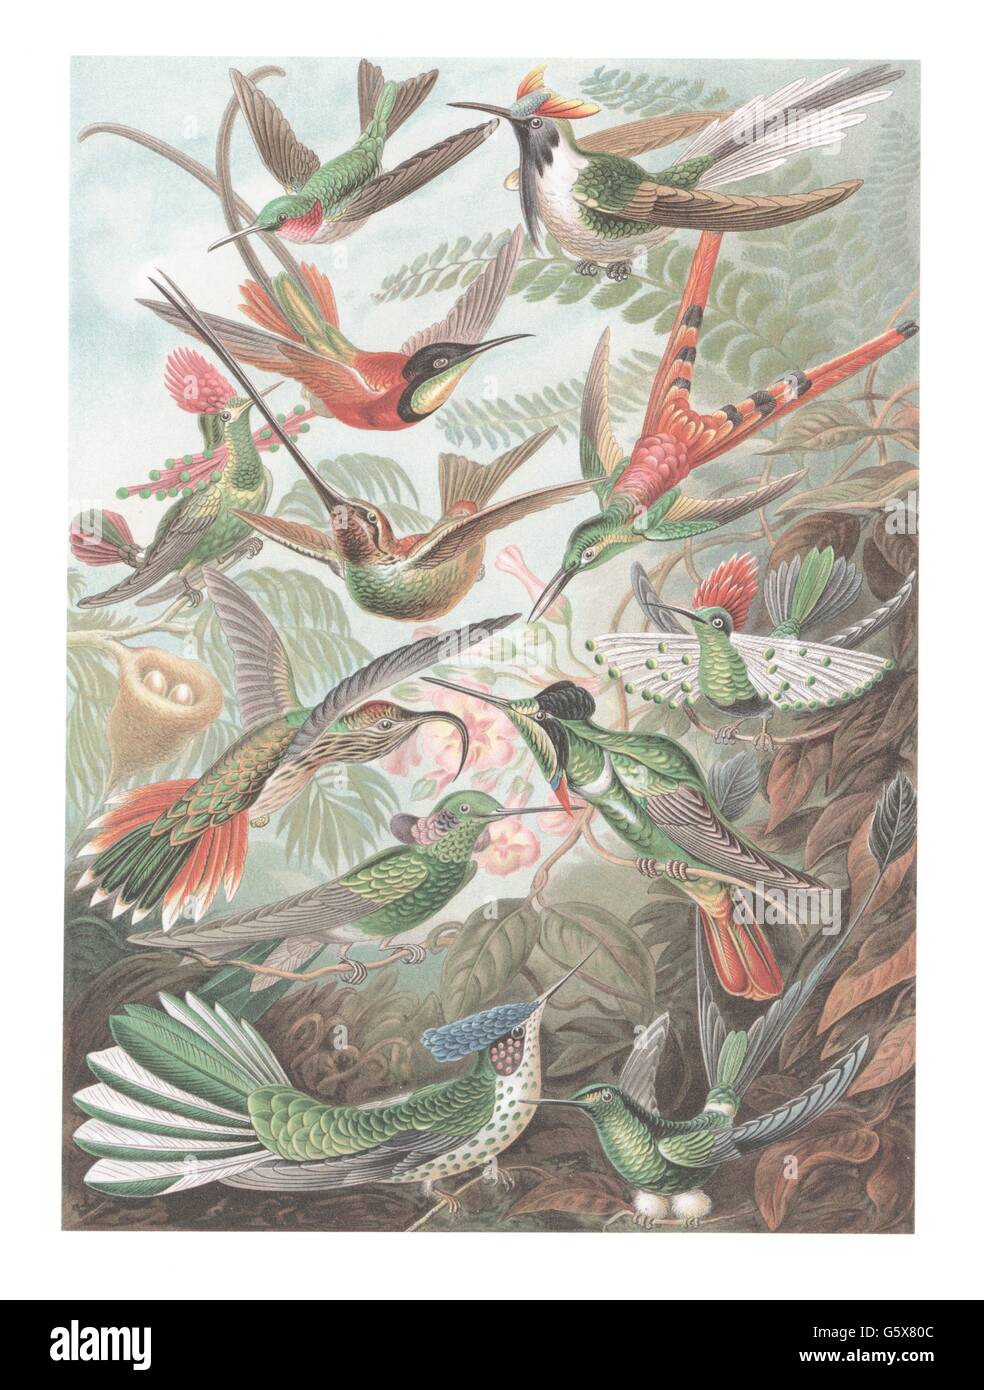 zoology / animals, birds, hummingbrids (Trochilidae), colour lithograph, out of: Ernst Haeckel, 'Kunstformen der Natur', Leipzig - Vienna, 1899 - 1904, Additional-Rights-Clearences-Not Available Stock Photo